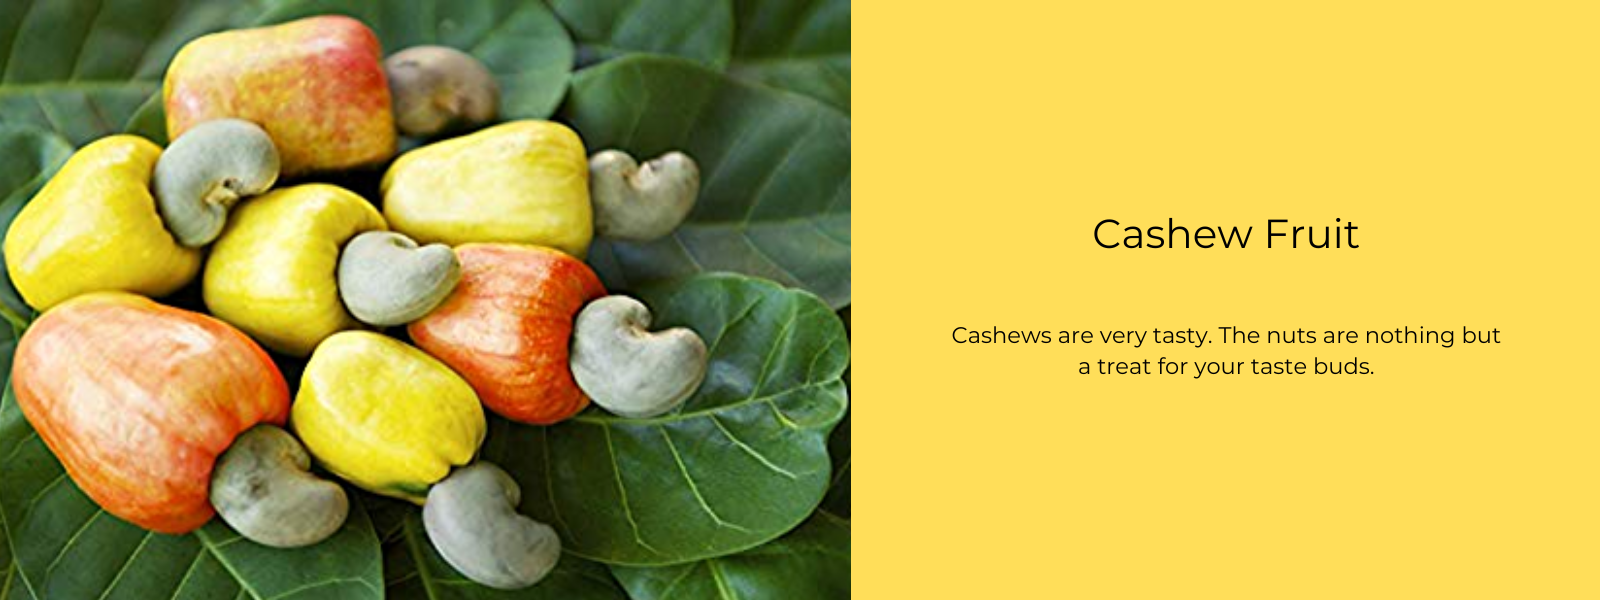 Cashew Fruit - Health Benefits, Uses and Important Facts